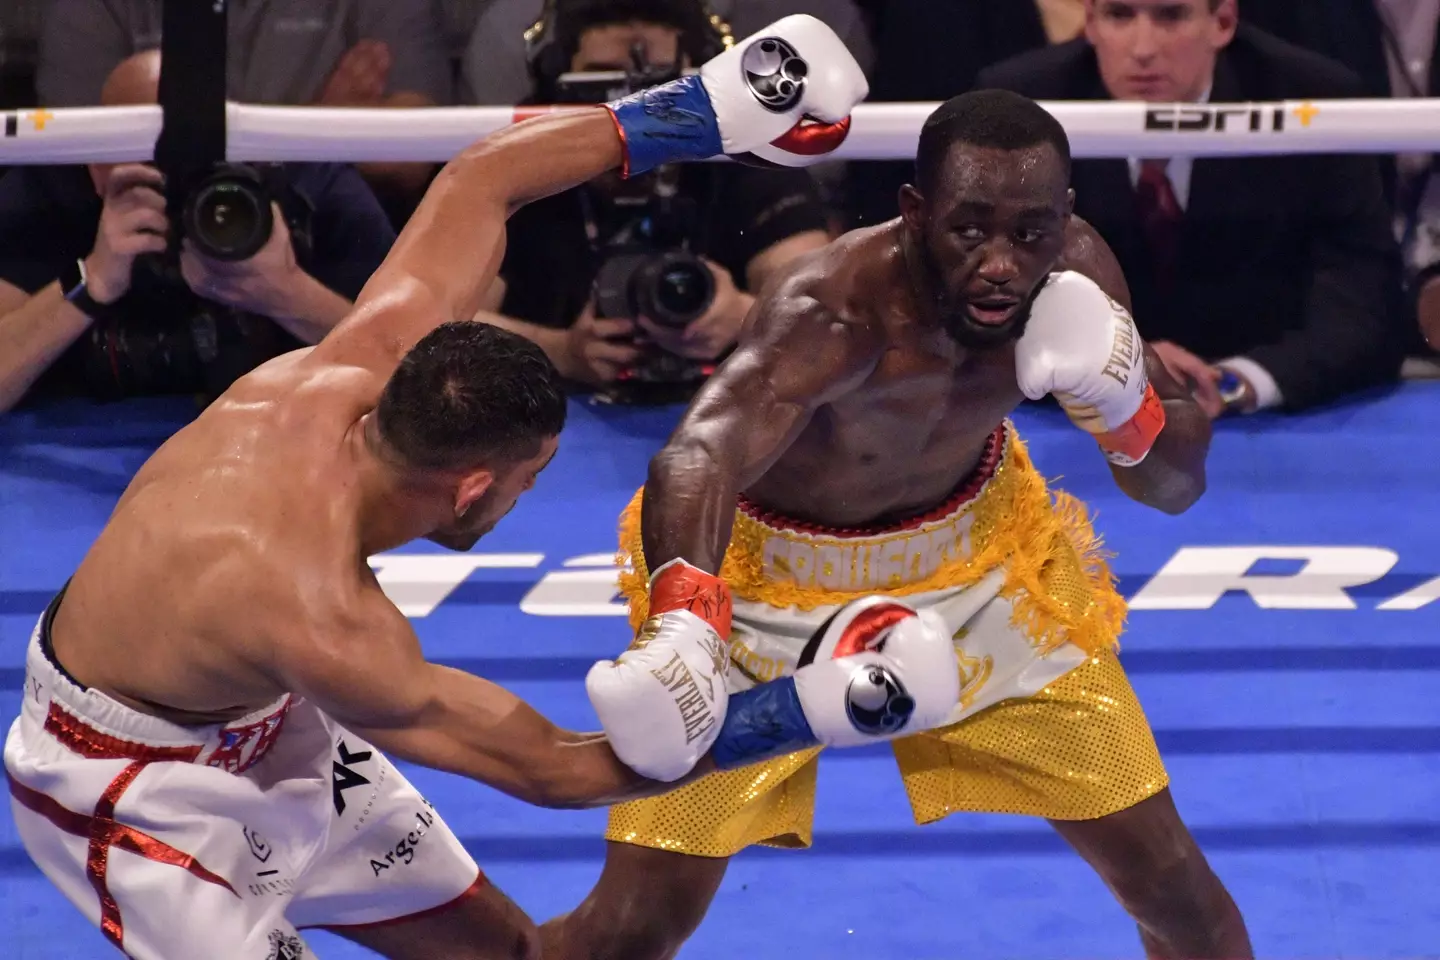 Khan would lose to Terence Crawford at Madison Square Garden (Image: PA)